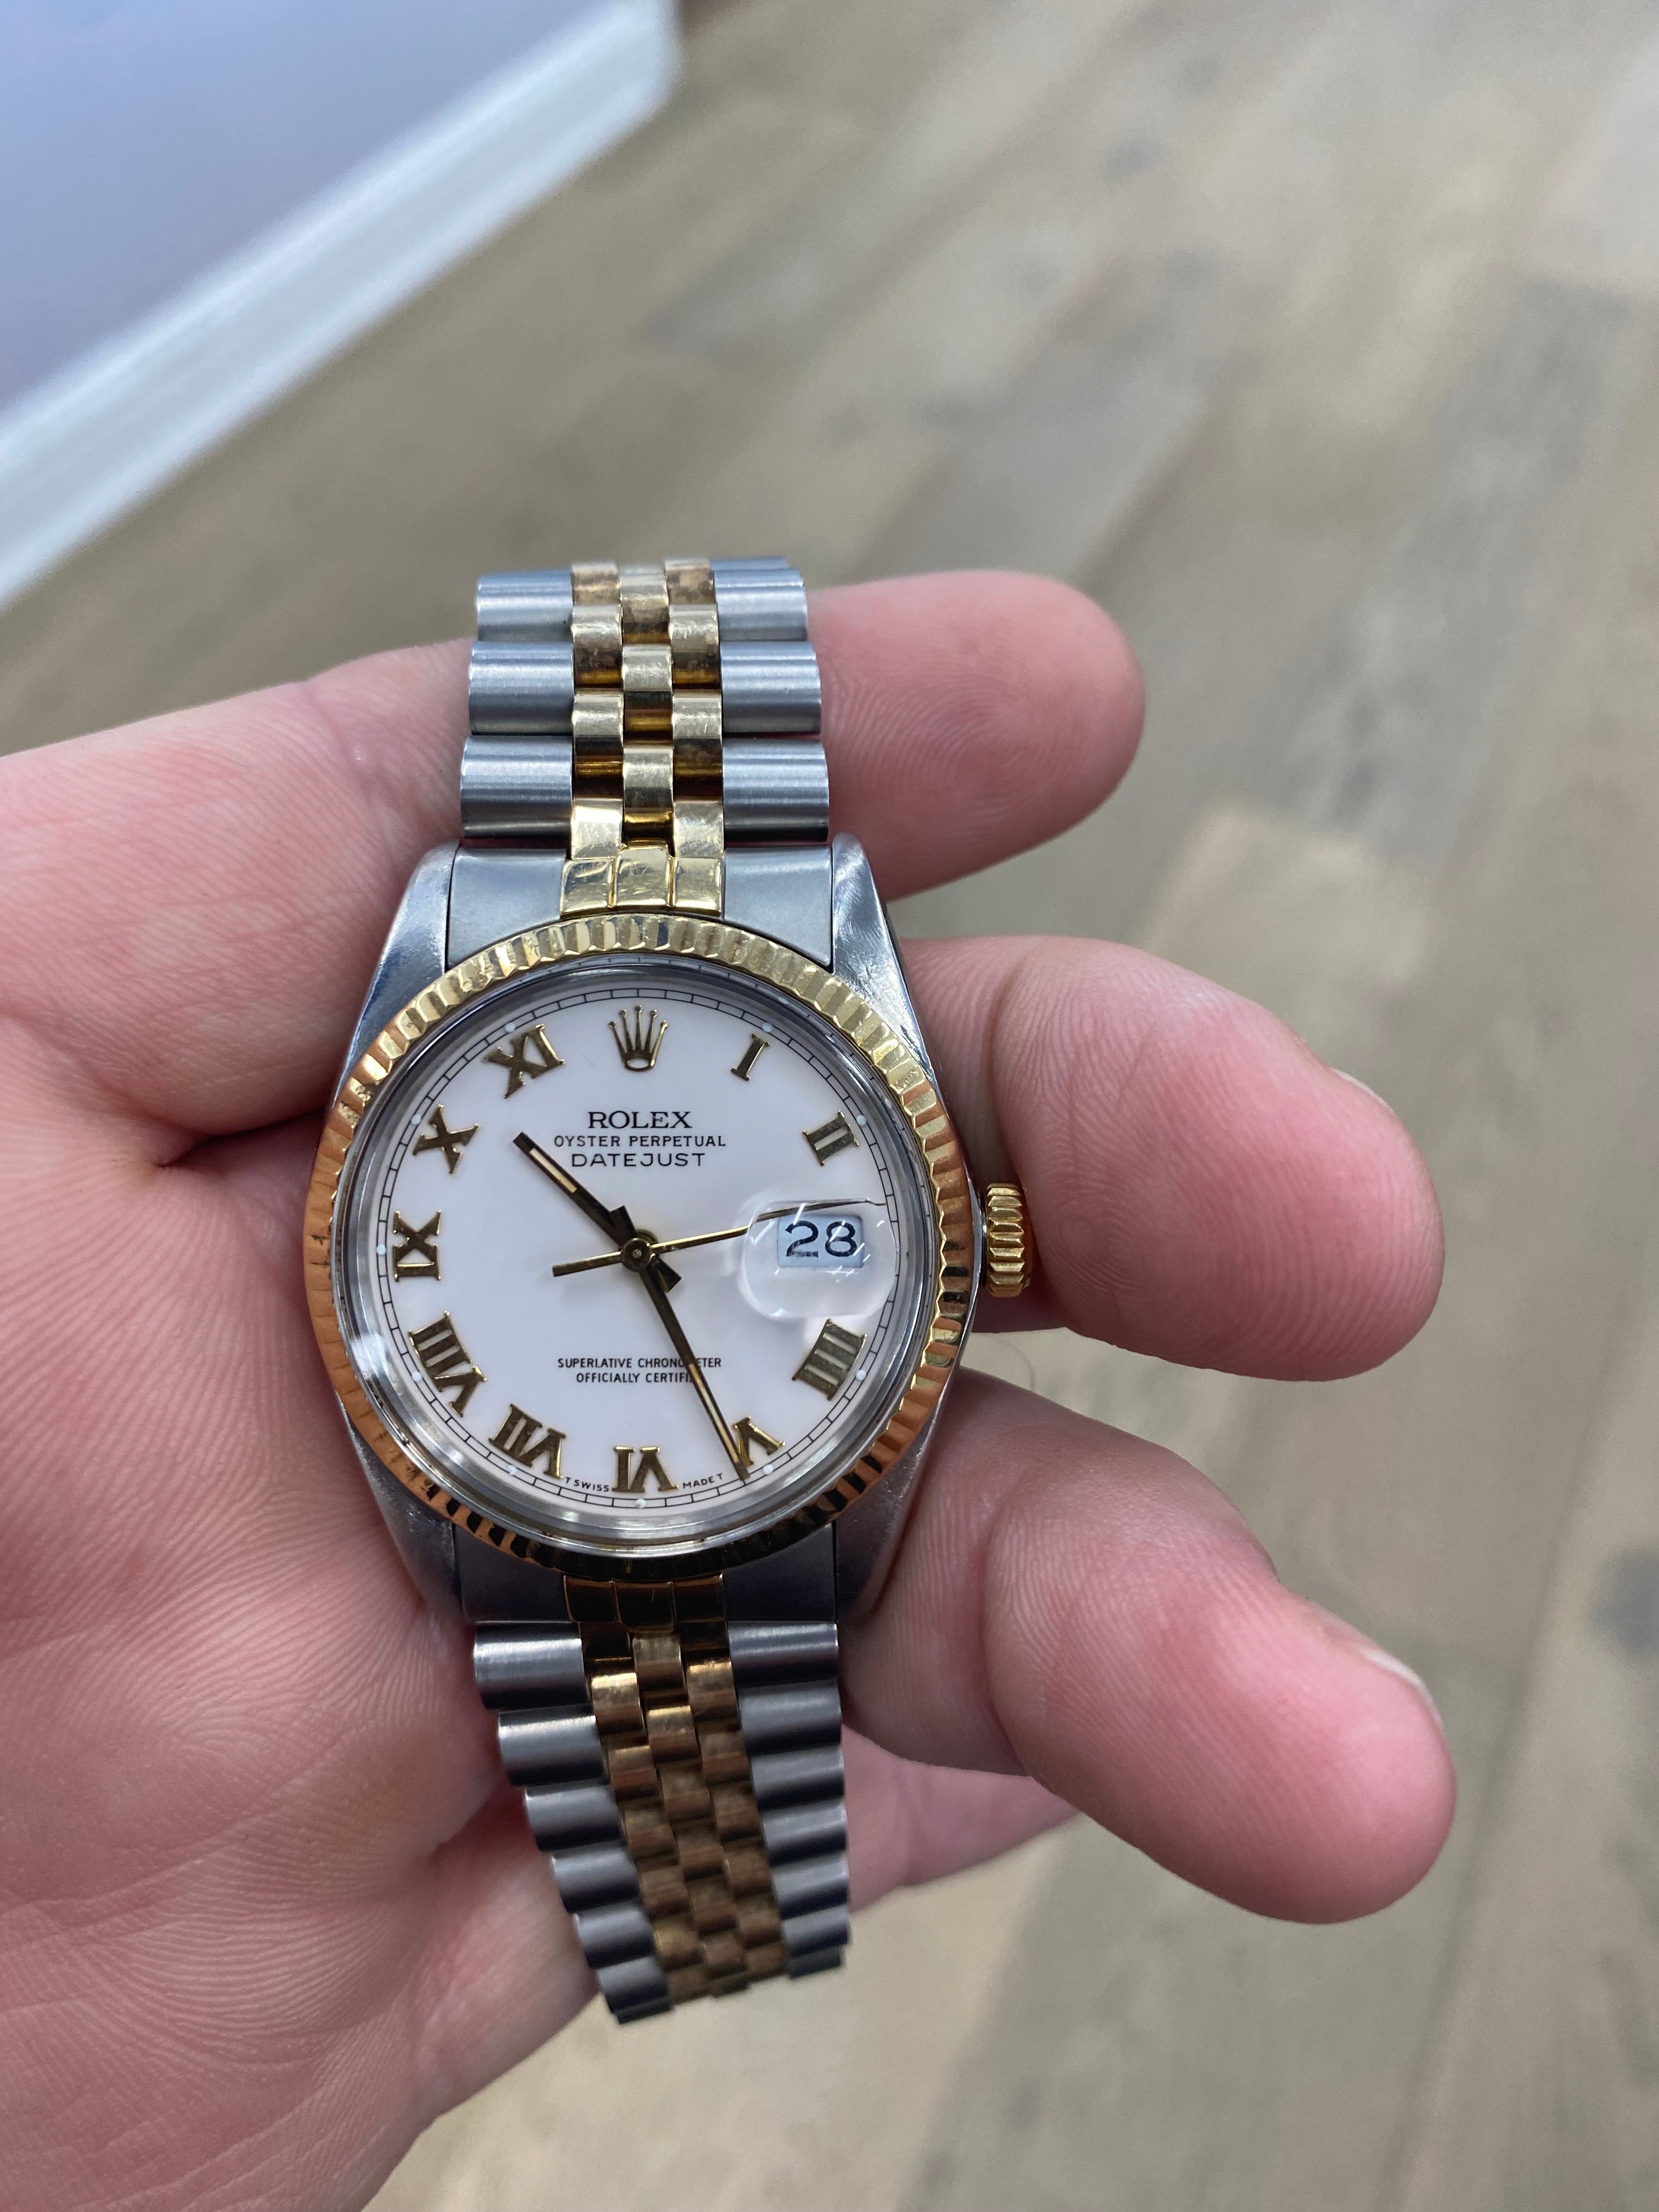 ROLEX DATE-JUST GOLD DIAL TWO-TONE AUTOMATIC WATCH – Bass Jewelry